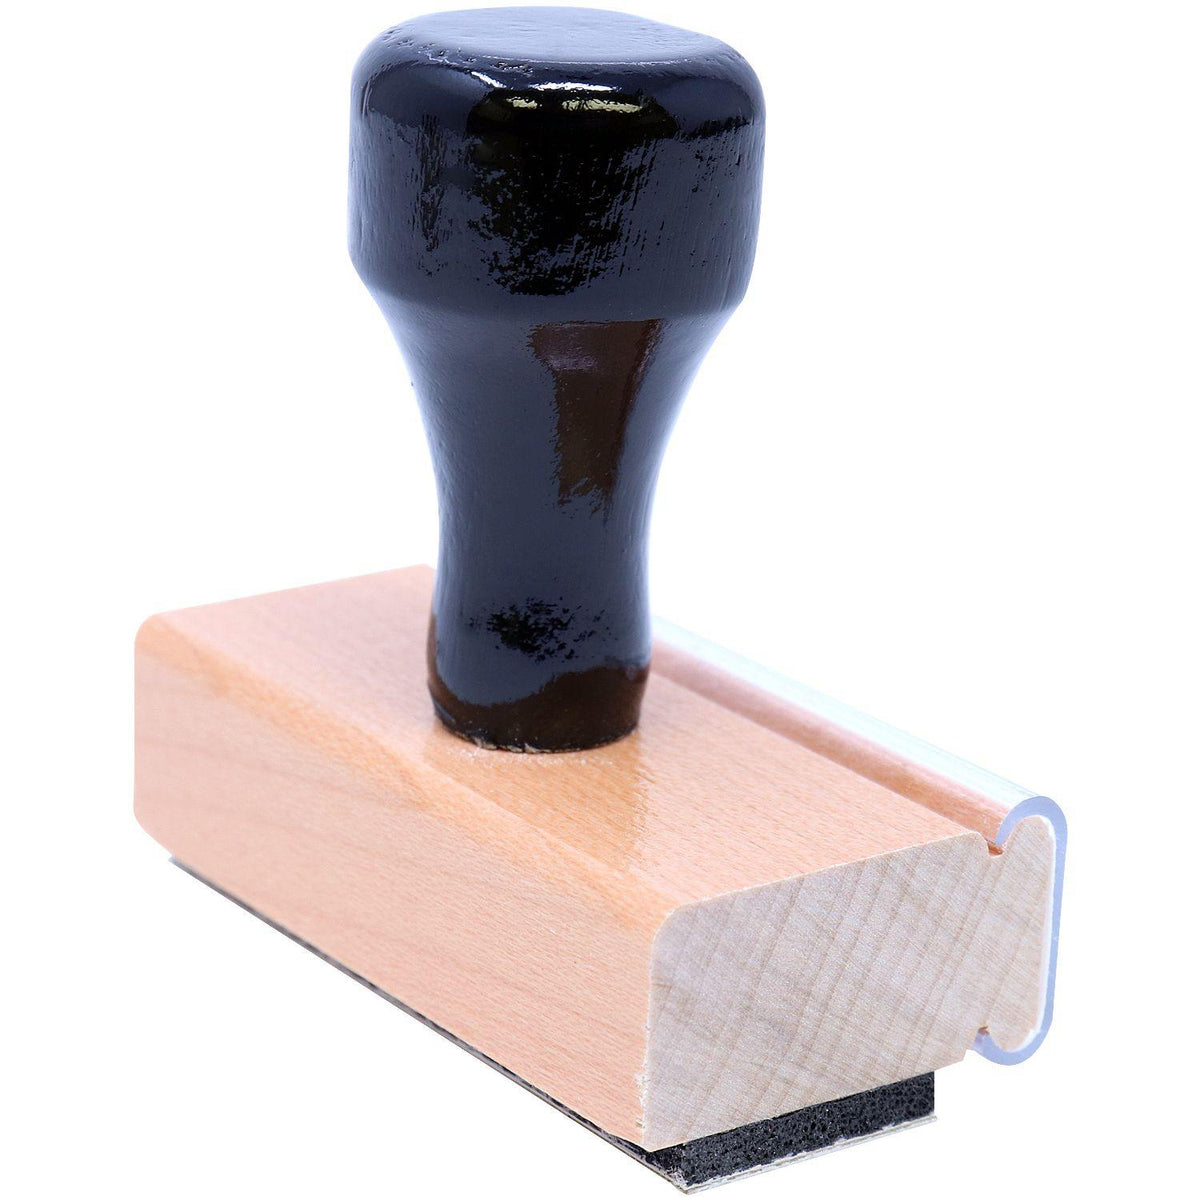 Lawyer Motion Rubber Stamp - Engineer Seal Stamps - Brand_Acorn, Impression Size_Small, Stamp Type_Regular Stamp, Type of Use_Legal